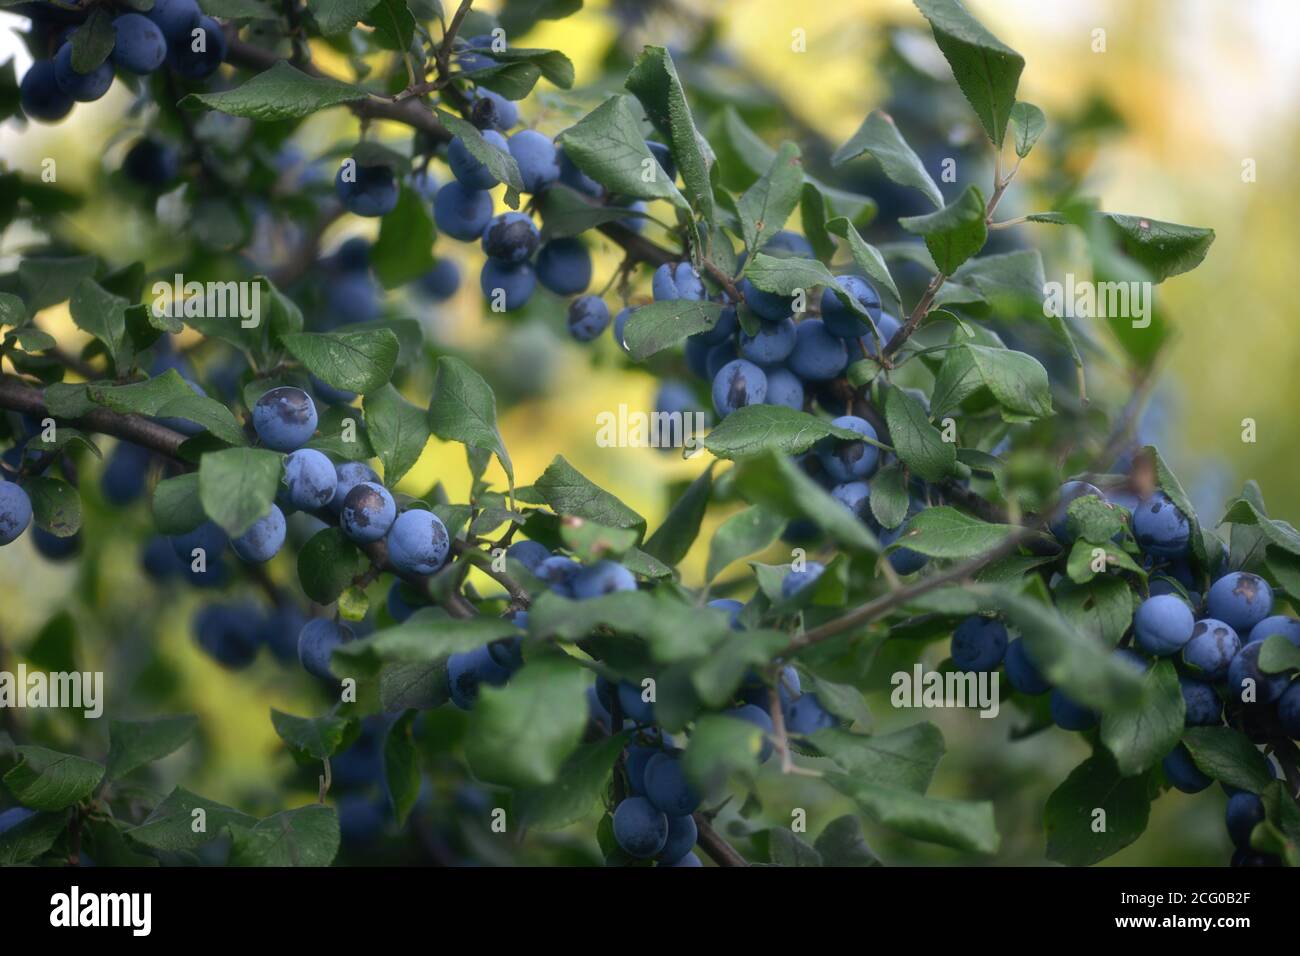 Blue round Fruits of the blackthorn bush. Romantic autumn still life with blackthorn or sloes. Stock Photo